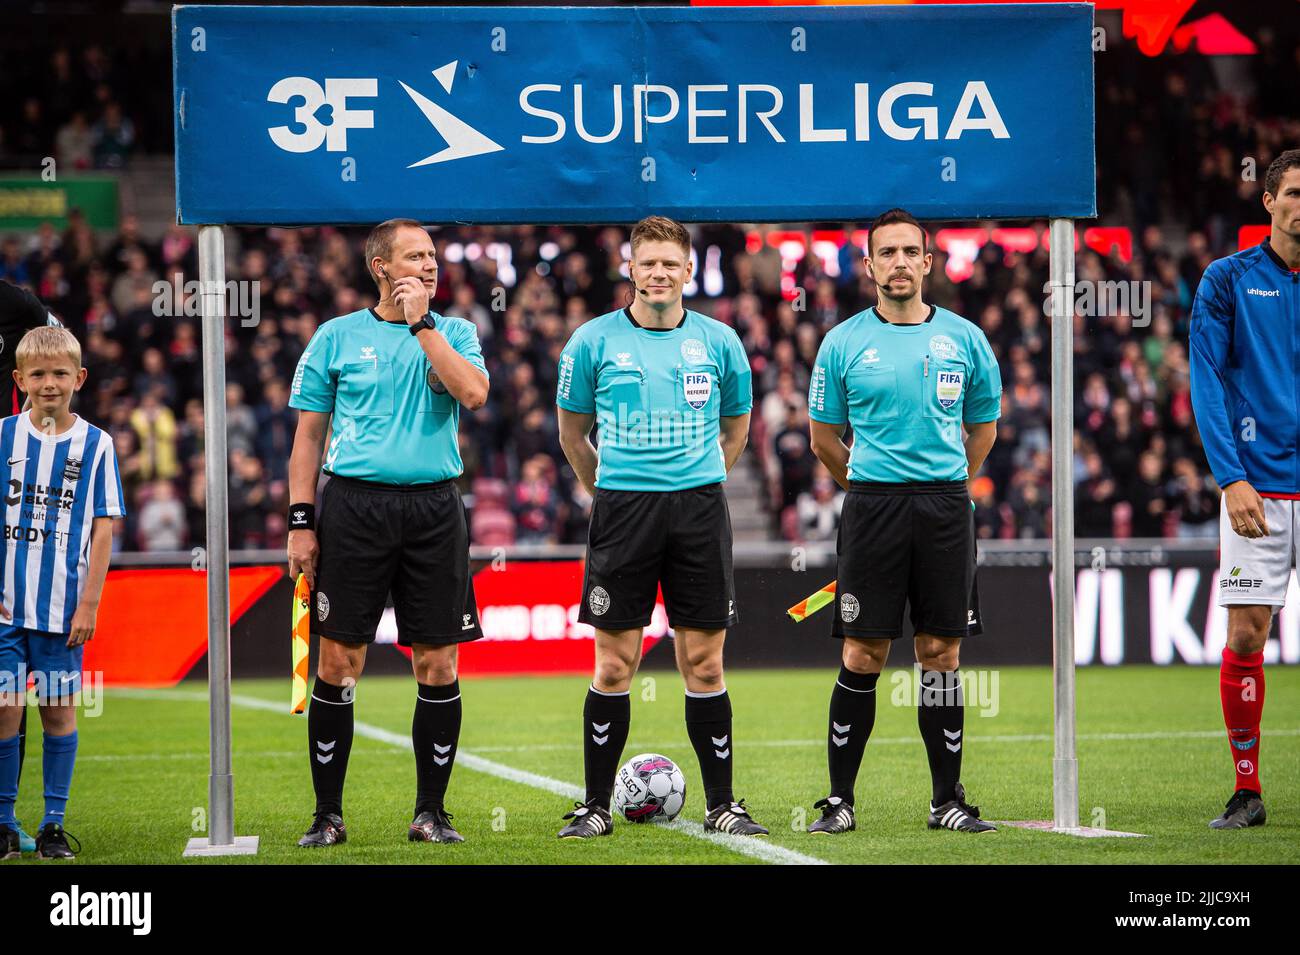 Herning, Denmark. 22nd, July 2022. Referee Jakob Sundberg seen during the 3F Superliga match between FC Midtjylland and Silkeborg IF at MCH Arena in Herning. (Photo credit: Gonzales Photo - Morten Kjaer). Stock Photo